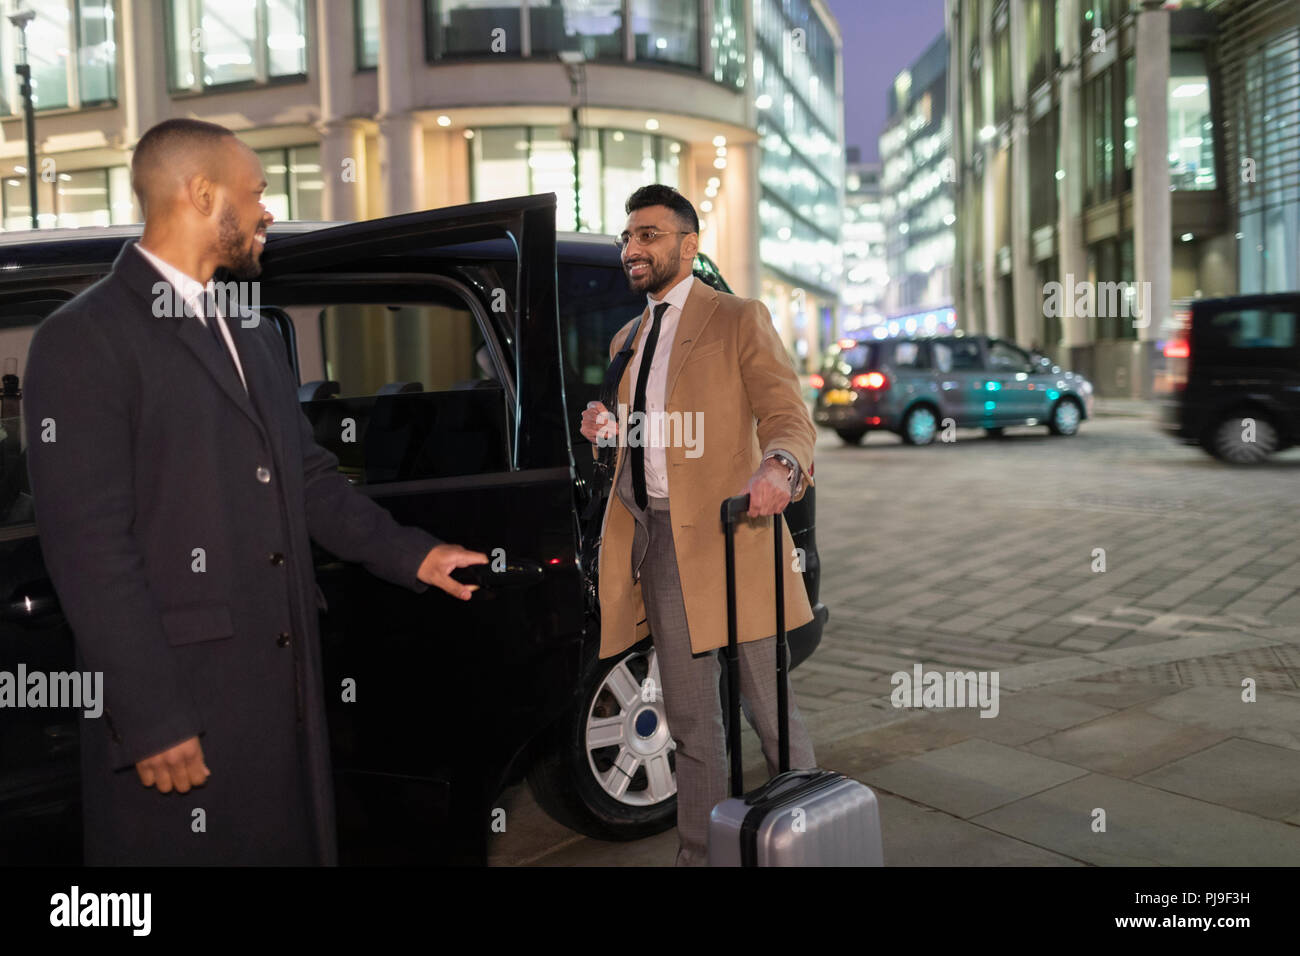 Driver opening car door for businessman with suitcase on urban street at night Stock Photo